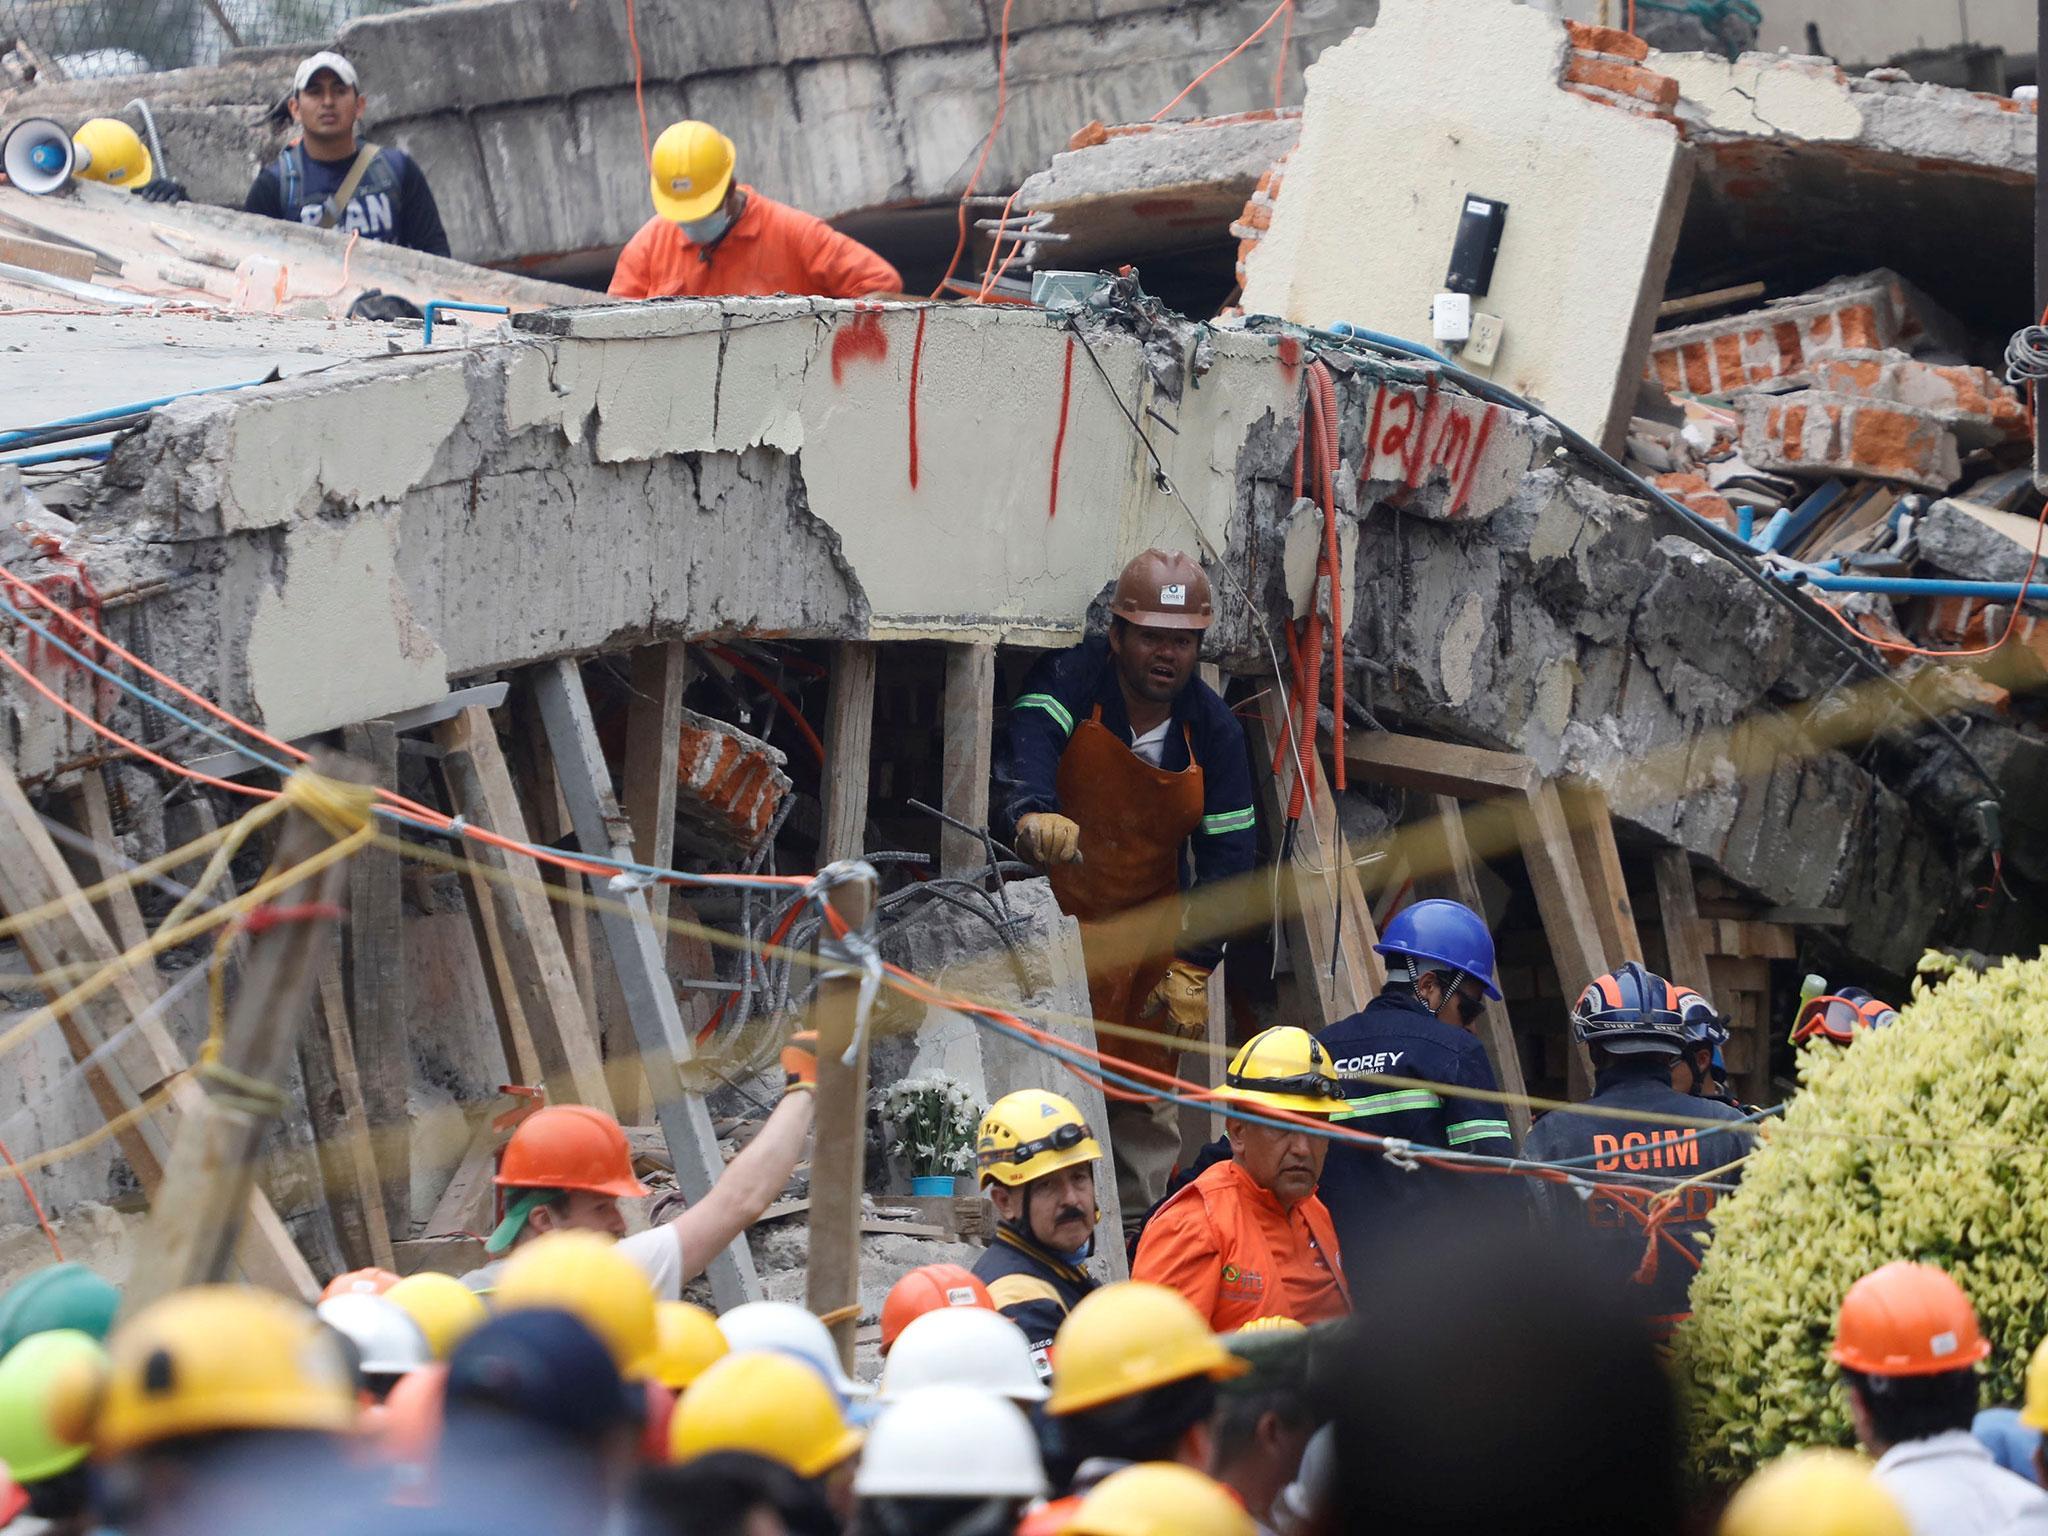 Rescue workers search through the rubble for students at Enrique Rebsamen school after an earthquake in Mexico City